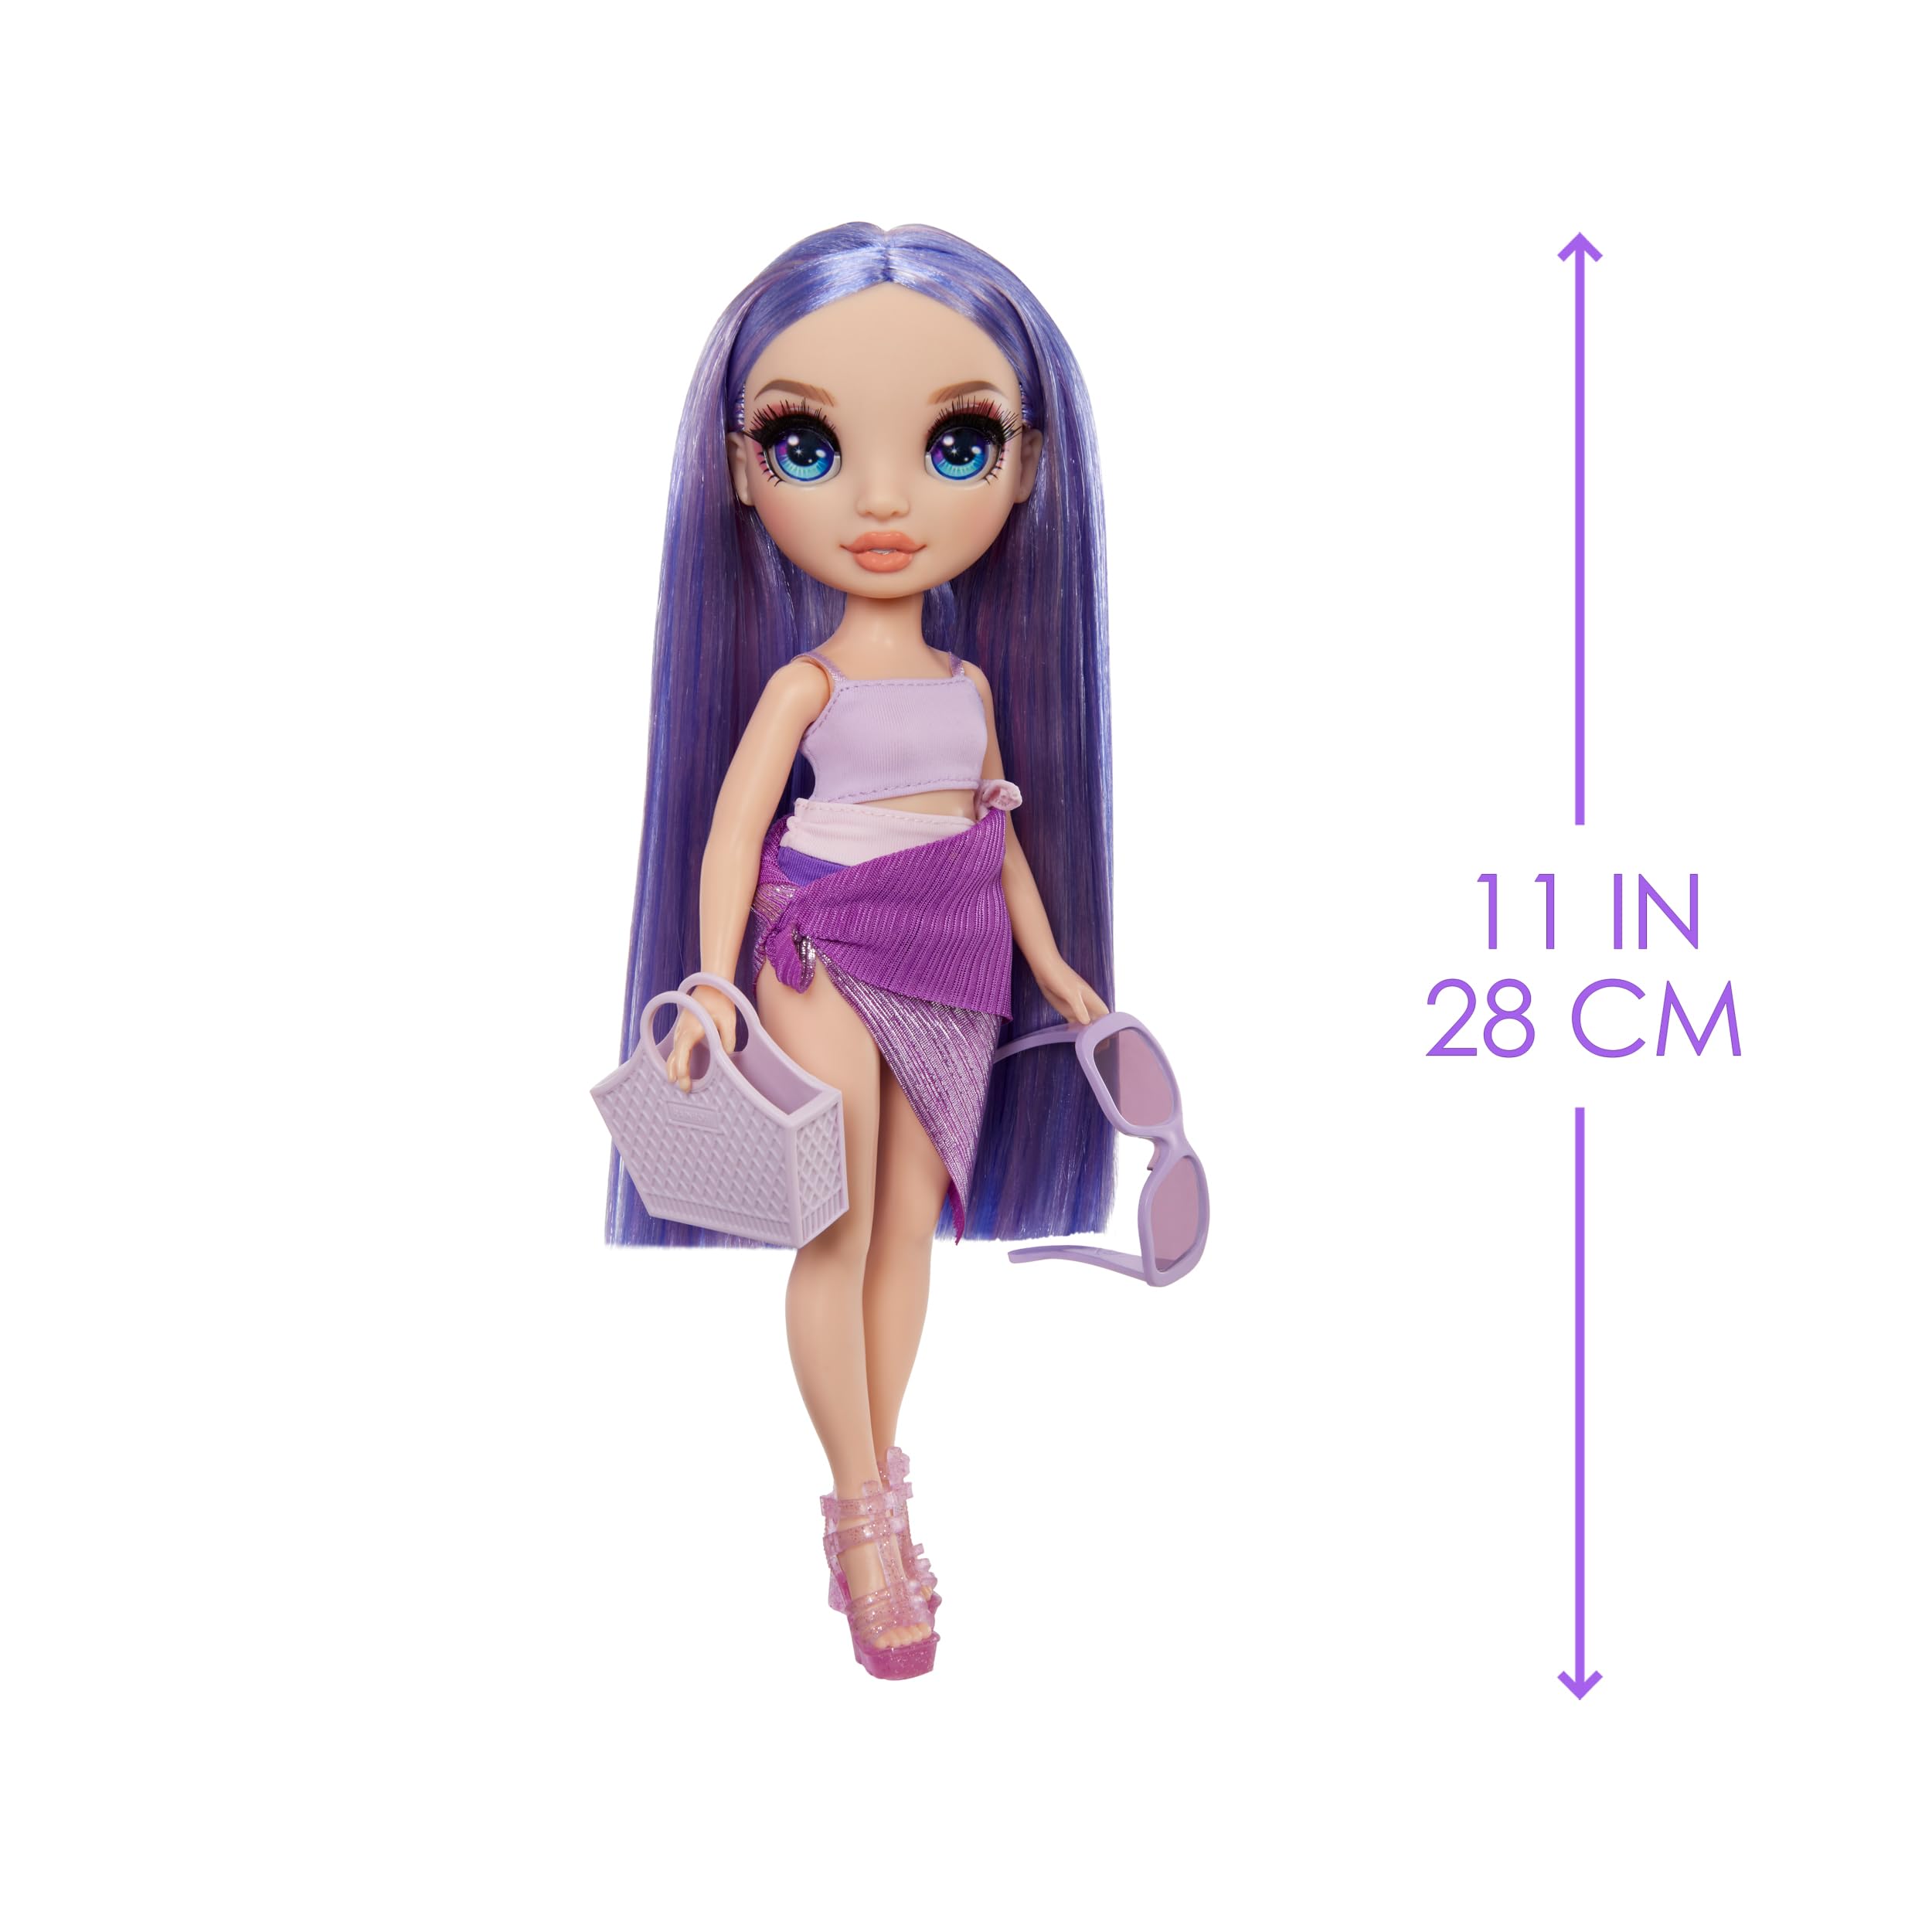 Rainbow High Swim & Style Violet (Purple) 11” Doll with Shimmery Wrap to Style 10+ Ways, Removable Swimsuit, Sandals, Fun Play Accessories. Kids Toy Gift Ages 4-12 Years